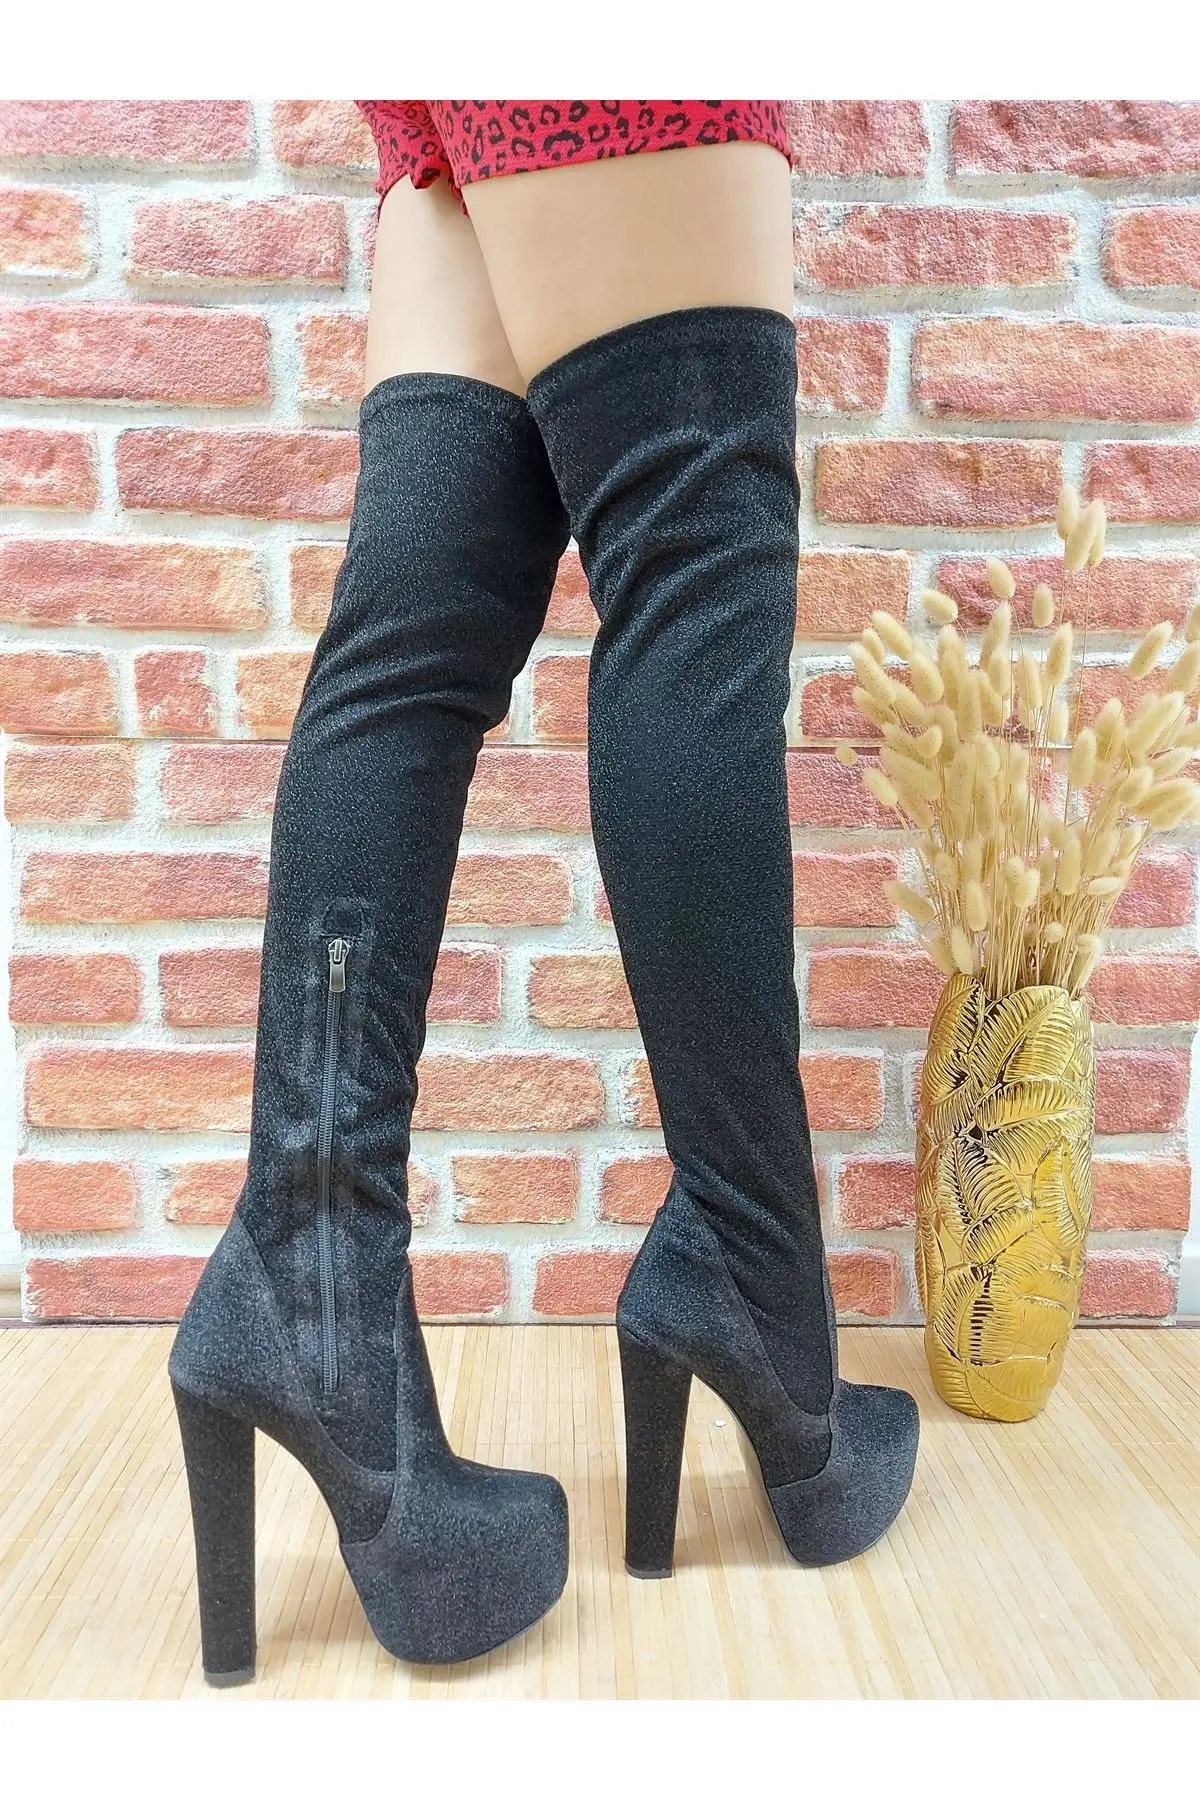 

Women's Fashion Handmade Special Sim High Heels Over The Knee Boots